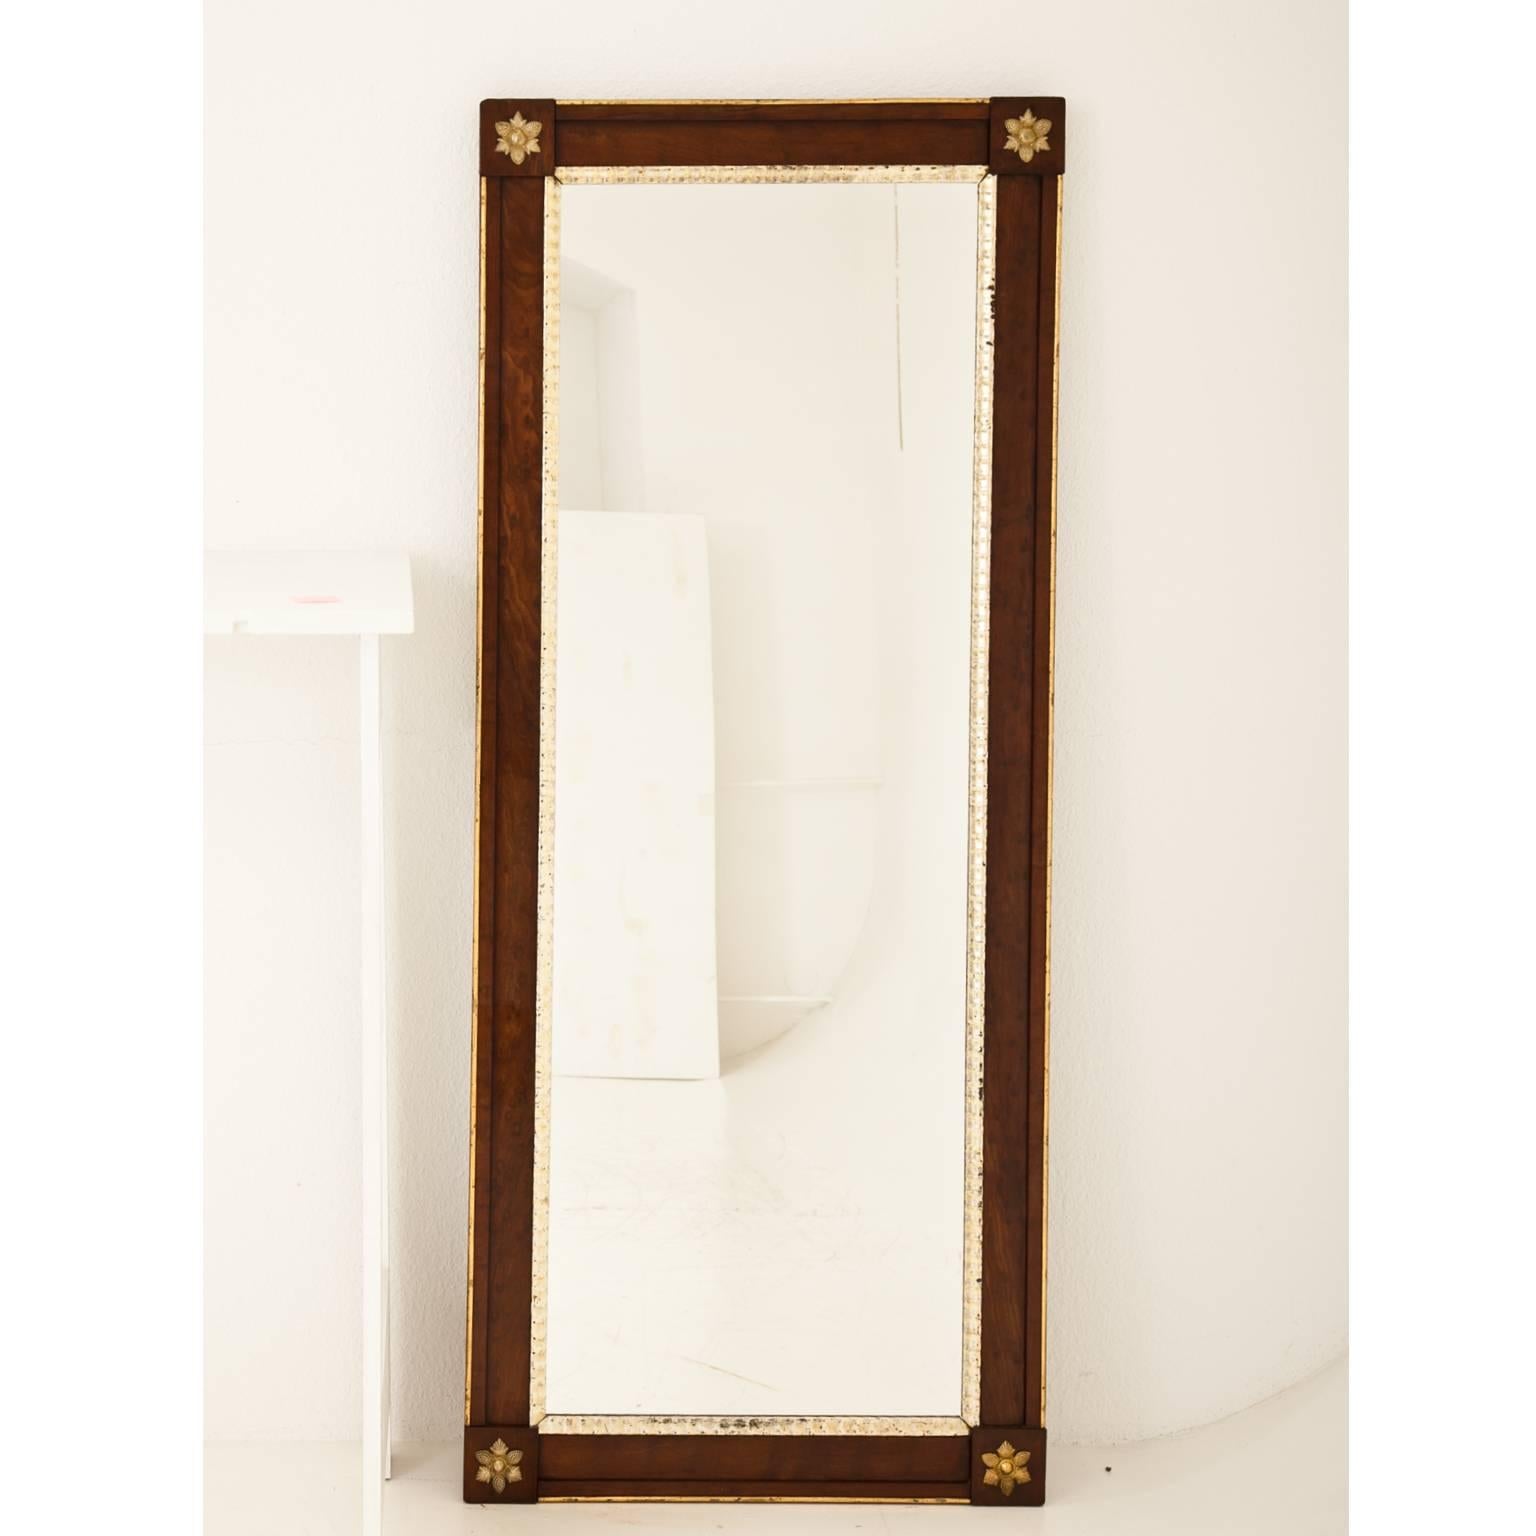 Large full-length wall mirror with brass trimmings and gilt moulding. Each corner is decorated with a brass flower. The measurements of the mirror pane are 147 x 50 cm.